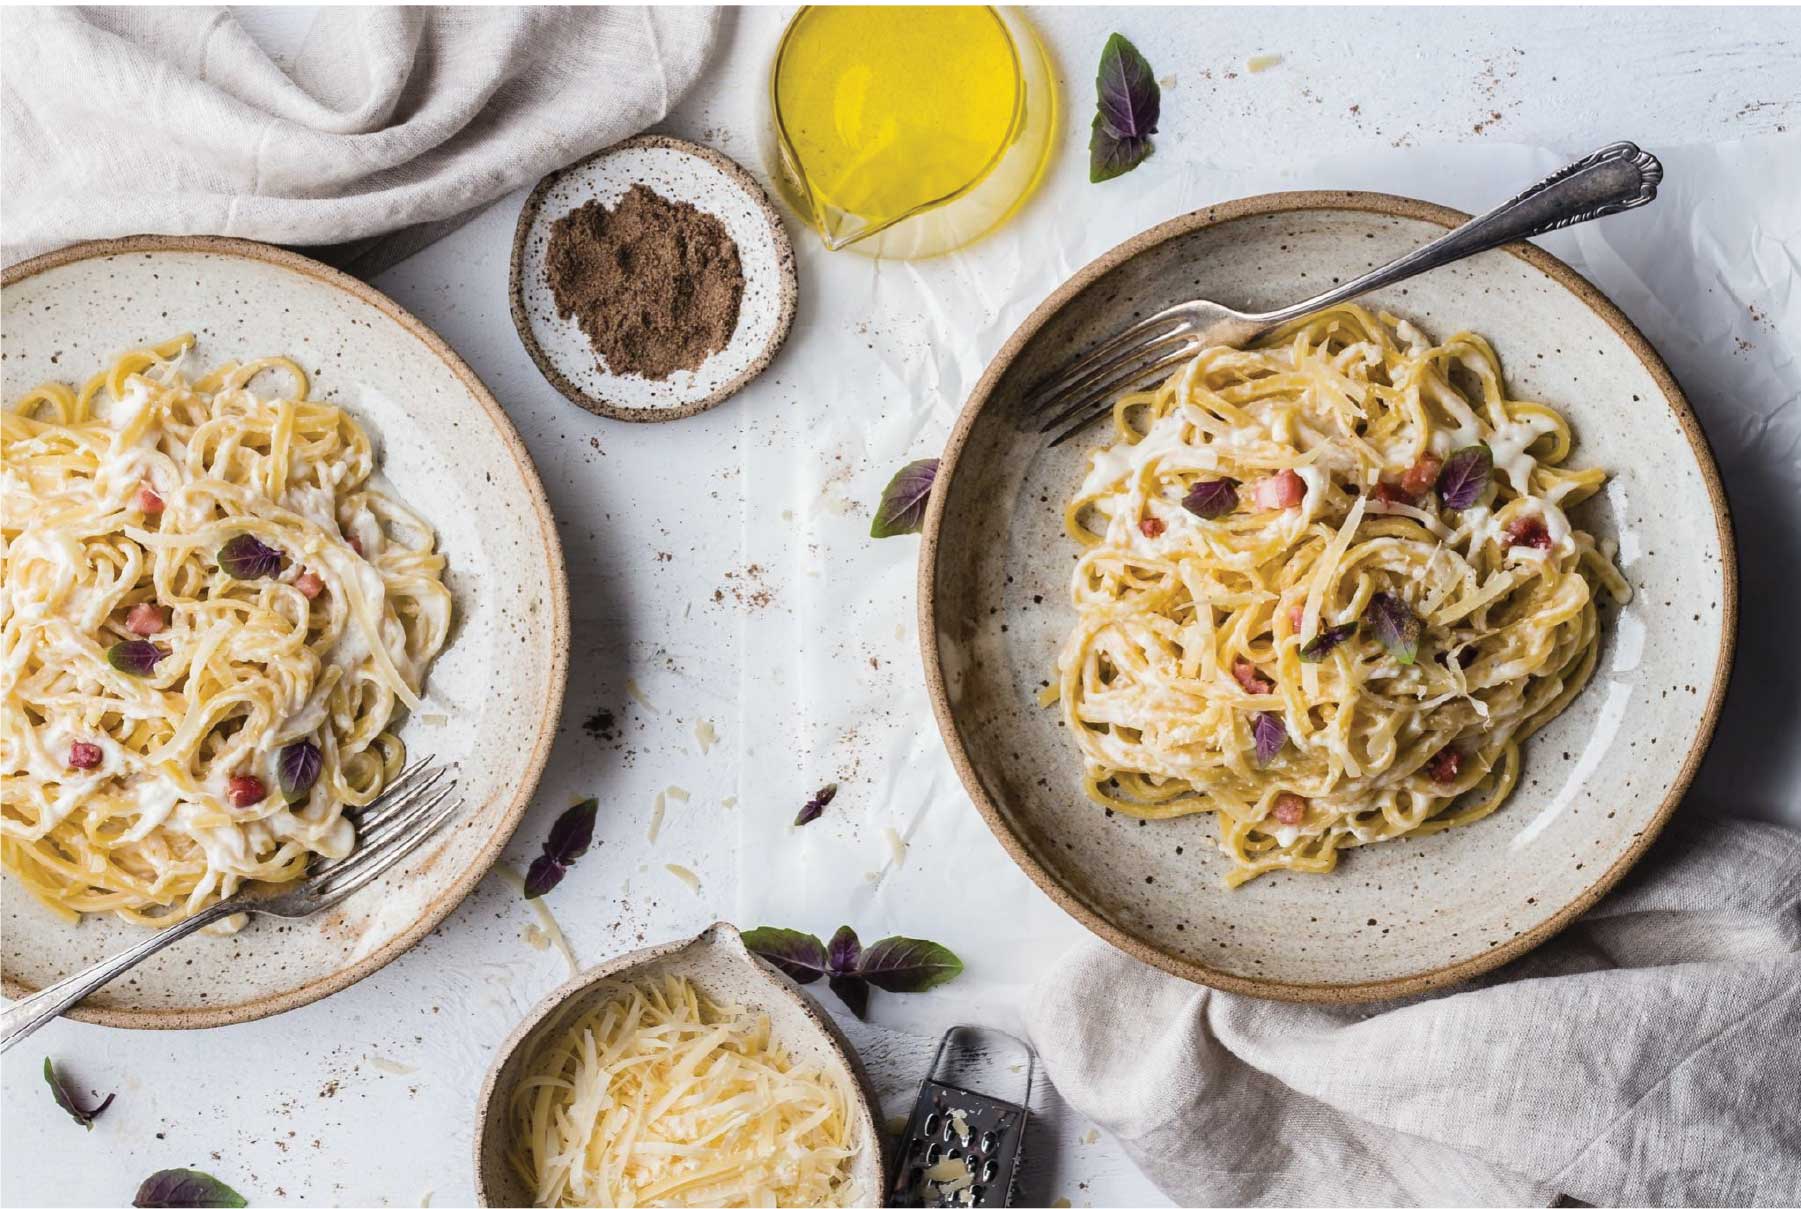 two beige plates of pasta carbonara on a white cloth background